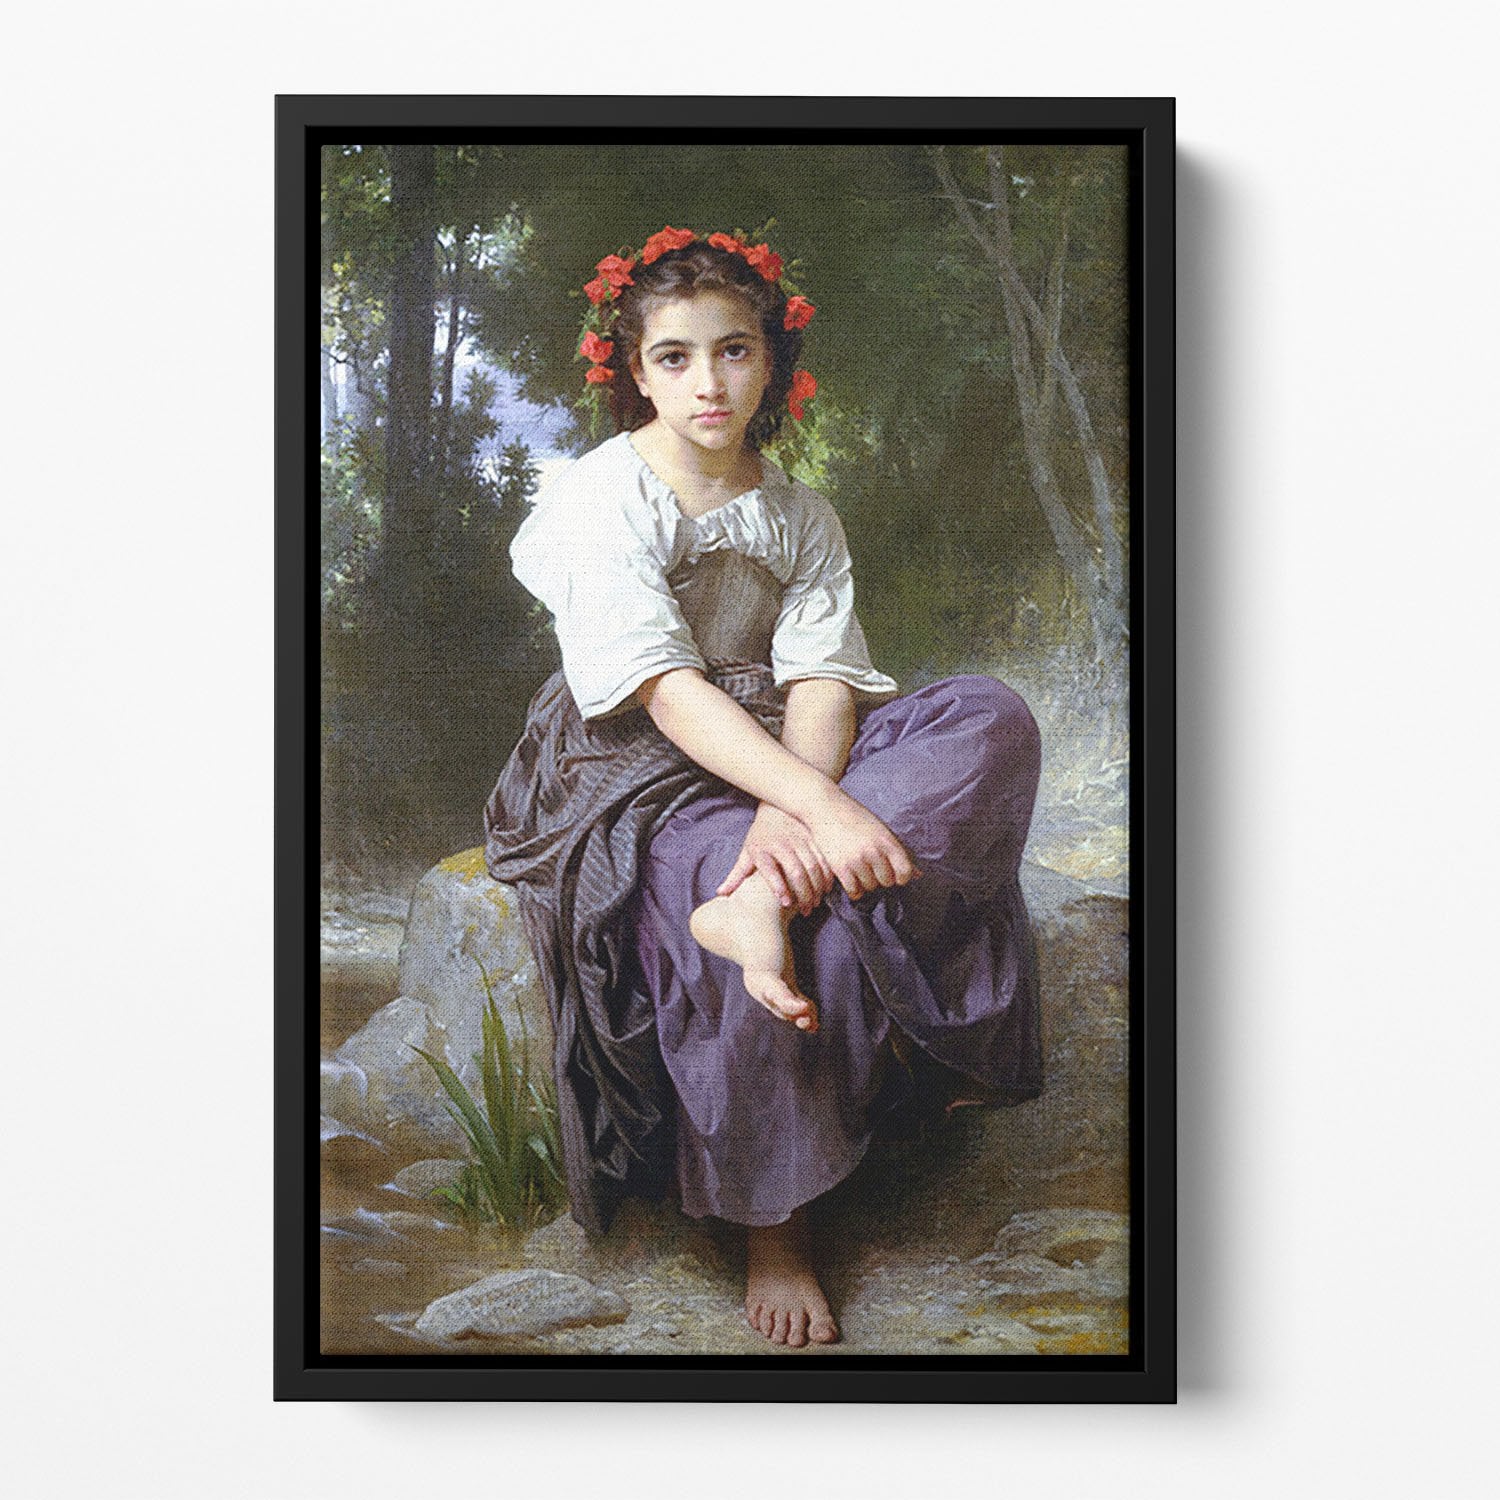 At the Edge of the Brook 2 By Bouguereau Floating Framed Canvas